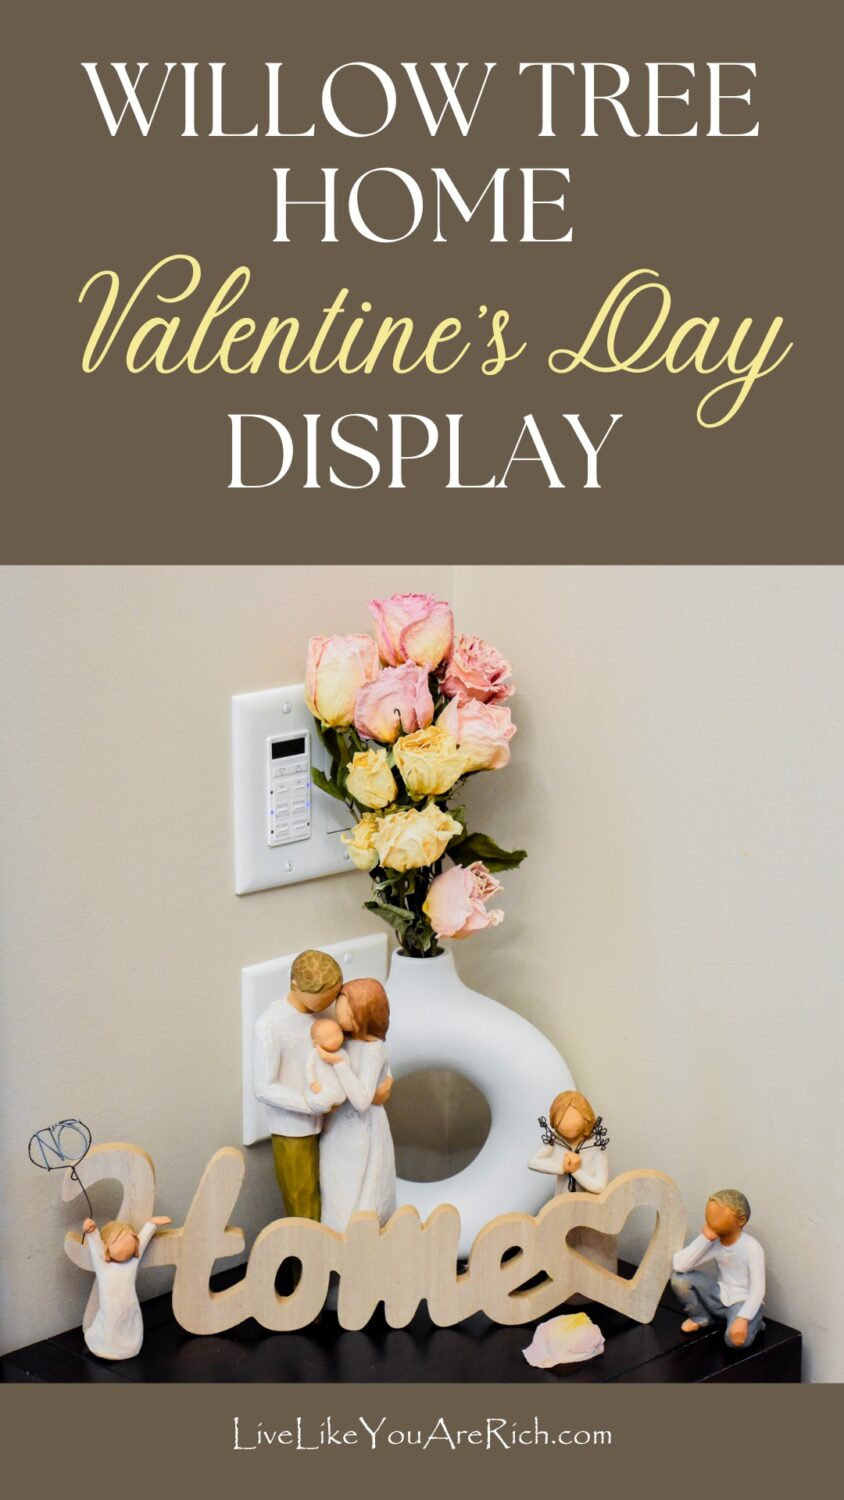 Willow Tree Home Valentine's Day Display